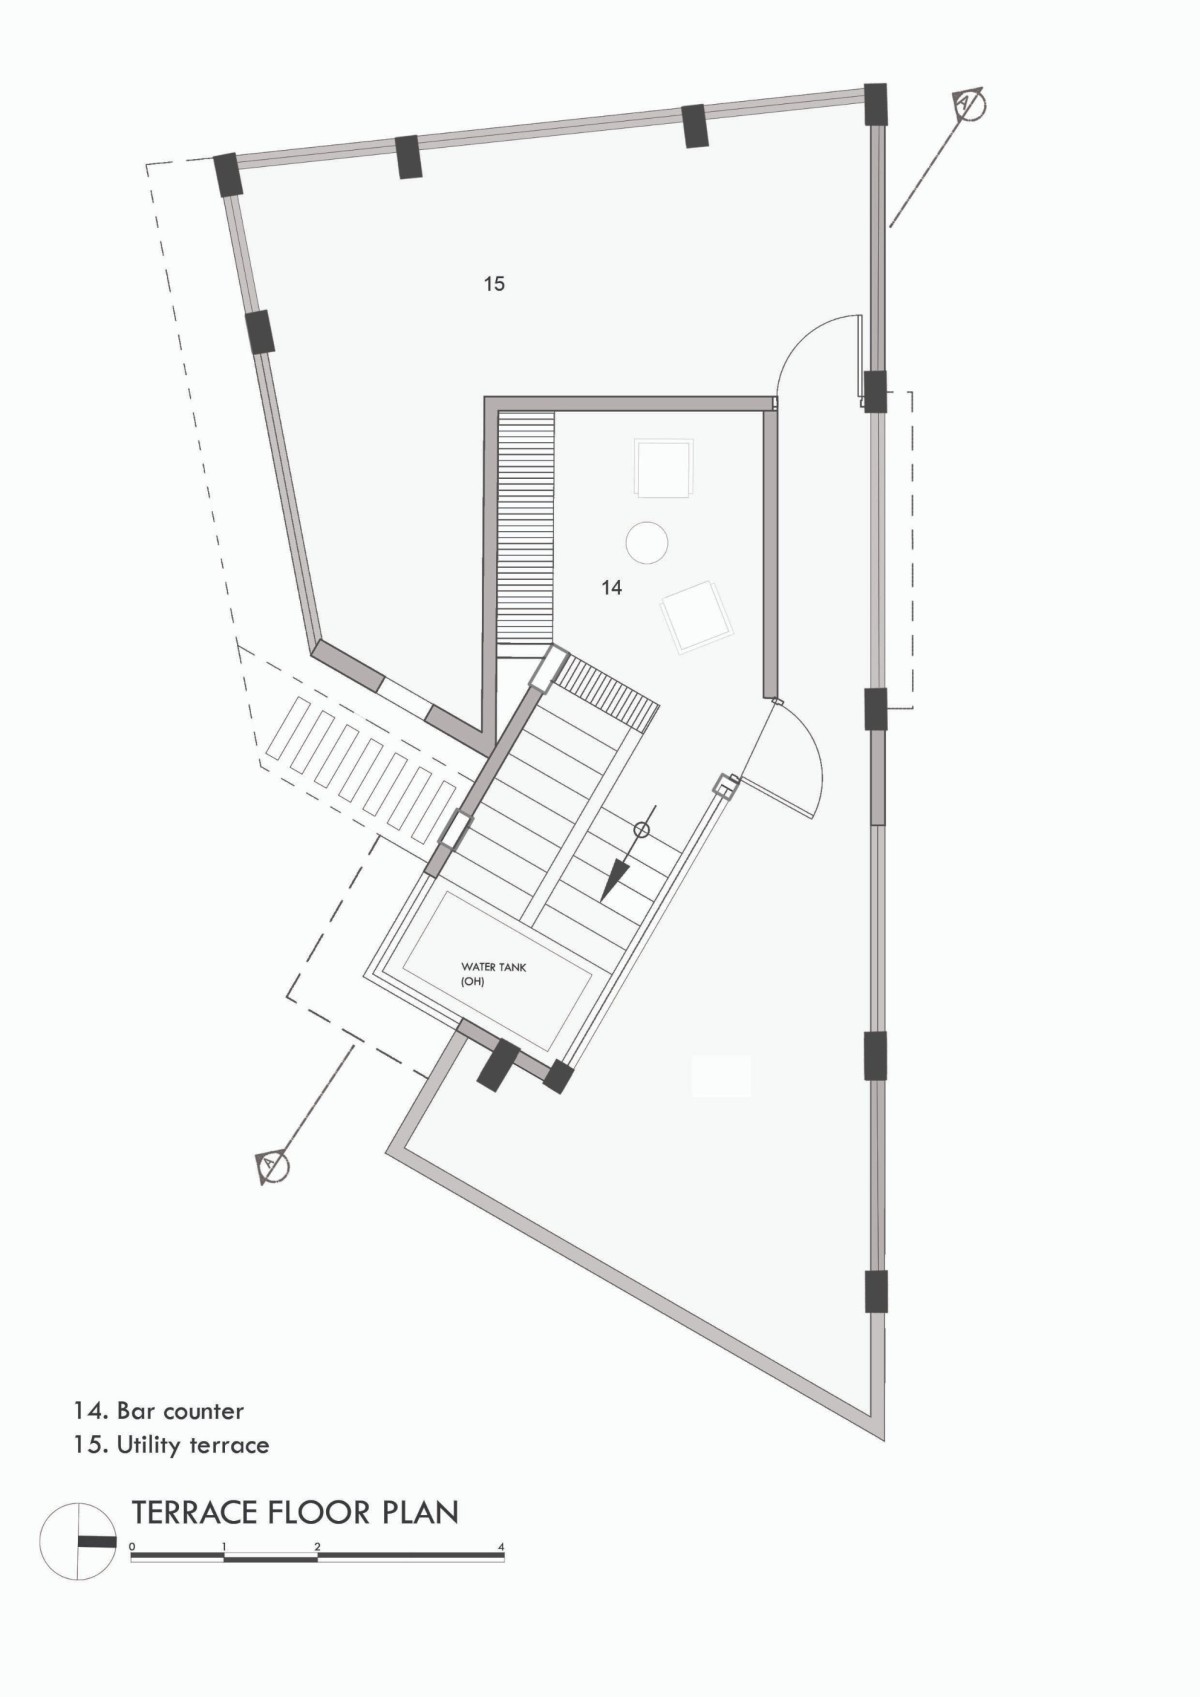 Terrace Plan of The N’Arrow House by Designloom Architects